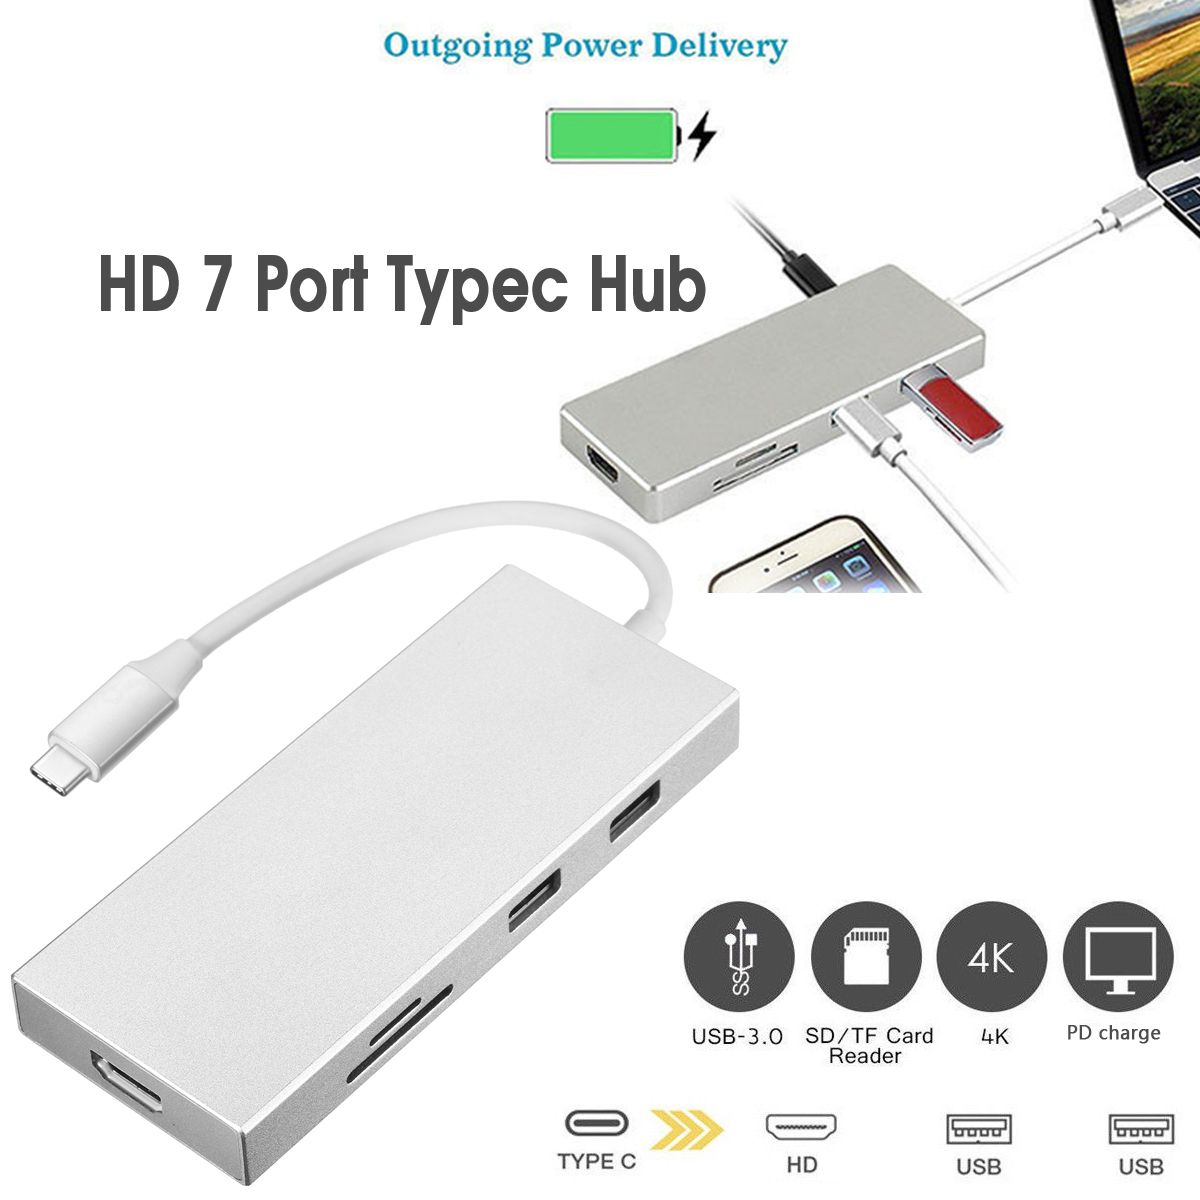 7-IN-1-Multifunctional-Type-C-Hub-Adapter-Docking-Station-with-USB30-Type-C-31-PD-4K-HDMI-Compatible-1947380-1